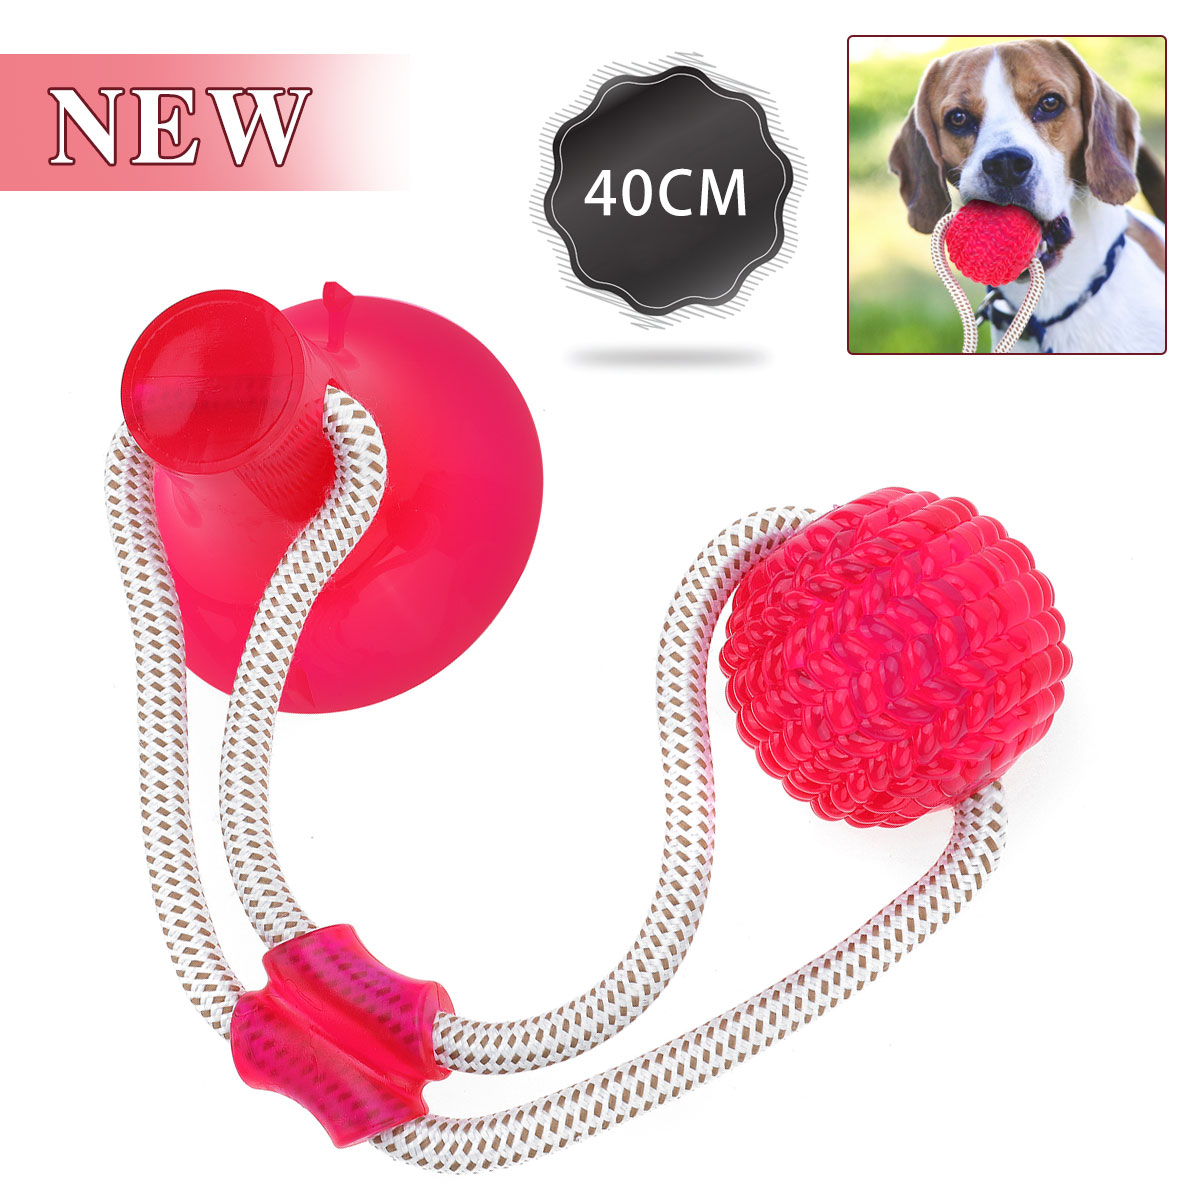 Pet-Molar-Bite-Toy-Suction-Cup-Rubber-Ball-Dog-Chew-Toys-Interactive-Puppy-Molar-Training-Rope-Tug-R-1900175-1